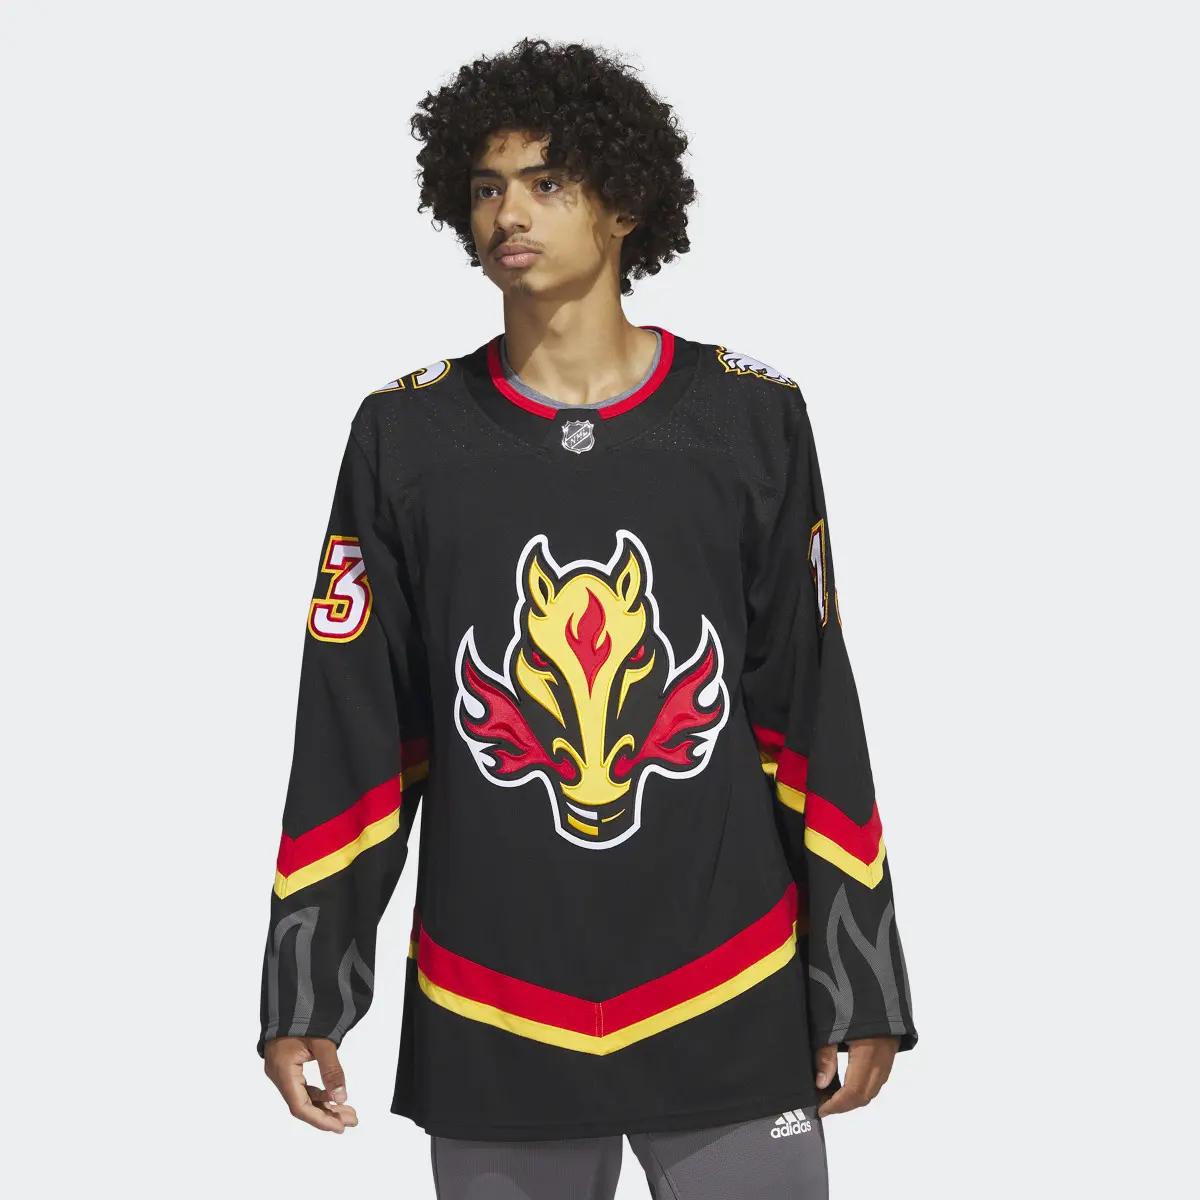 Adidas Flames Gaudreau Third Authentic Jersey. 2